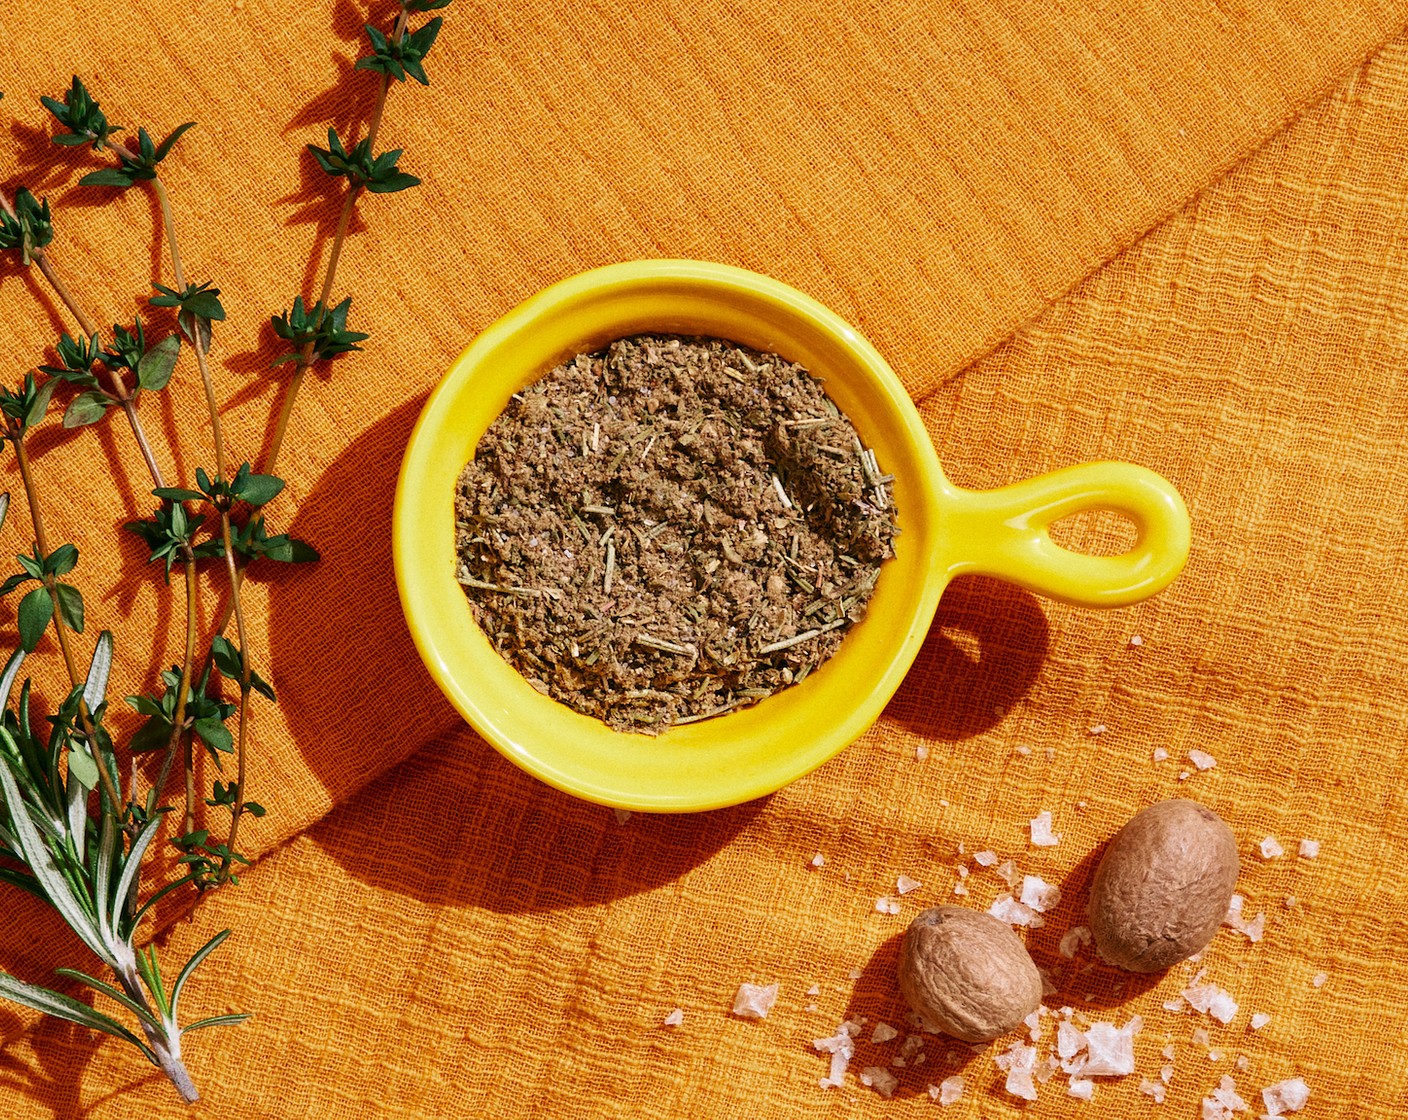 step 1 In a small bowl or jar, add Dried Sage (2 Tbsp), Dried Thyme (1 1/2 Tbsp), Dried Rosemary (1 Tbsp), Dried Marjoram (1 Tbsp), Fine Salt (1 tsp), Ground Nutmeg (1/2 tsp), and Ground Black Pepper (1/2 tsp) and mix until combined. Store in an airtight container.